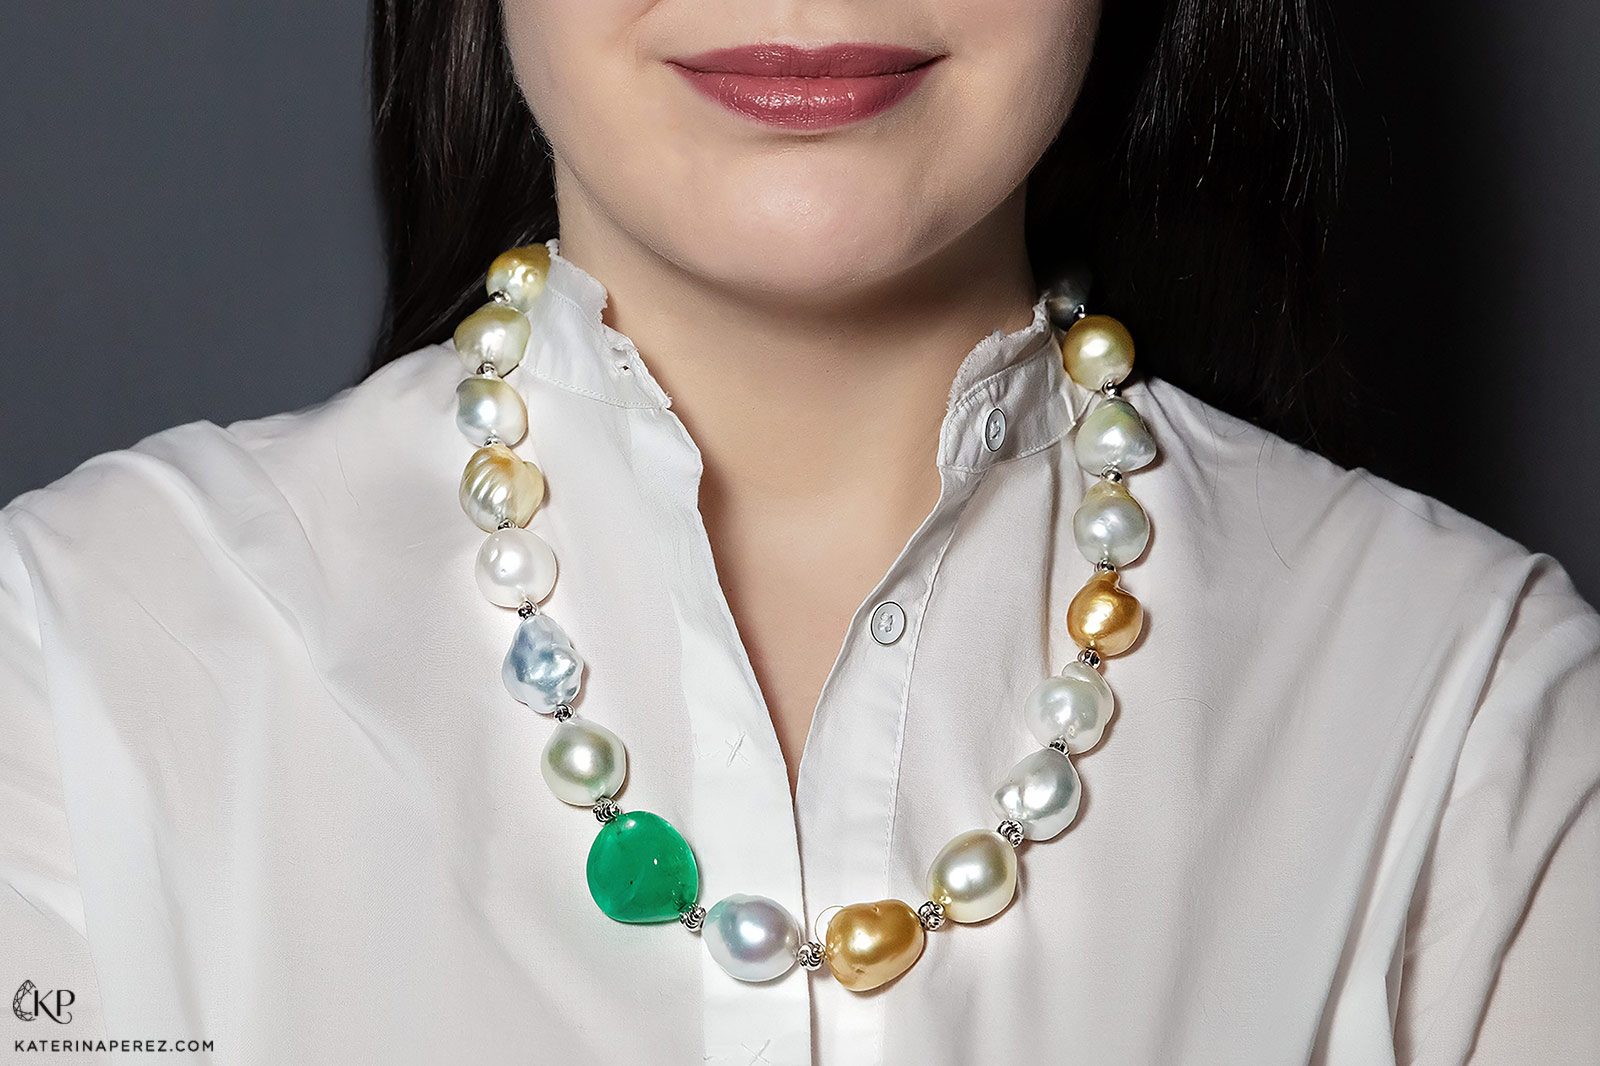 Alexander Laut necklace with 56ct Colombian emerald and South Sea pearls